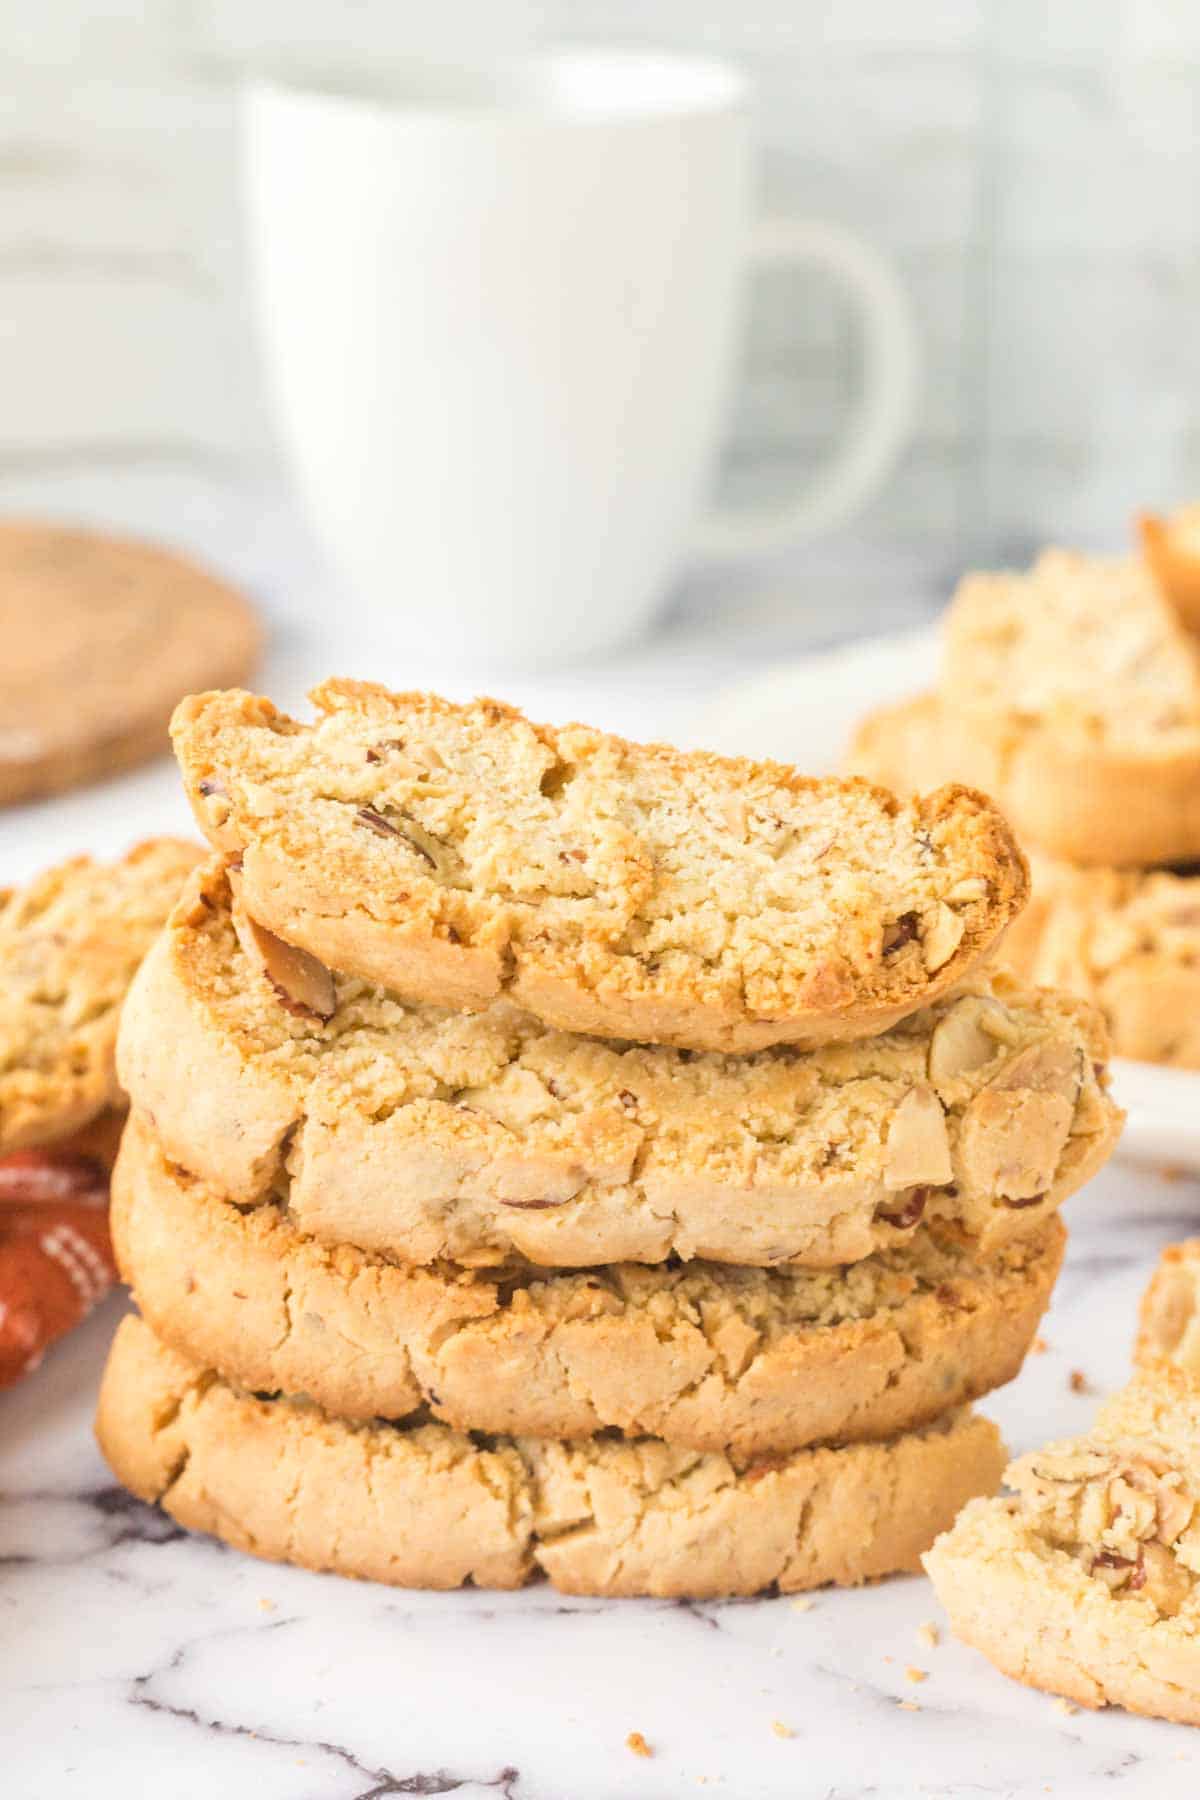 almond biscotti recipe with chocolate dip on the side stacked on a plate